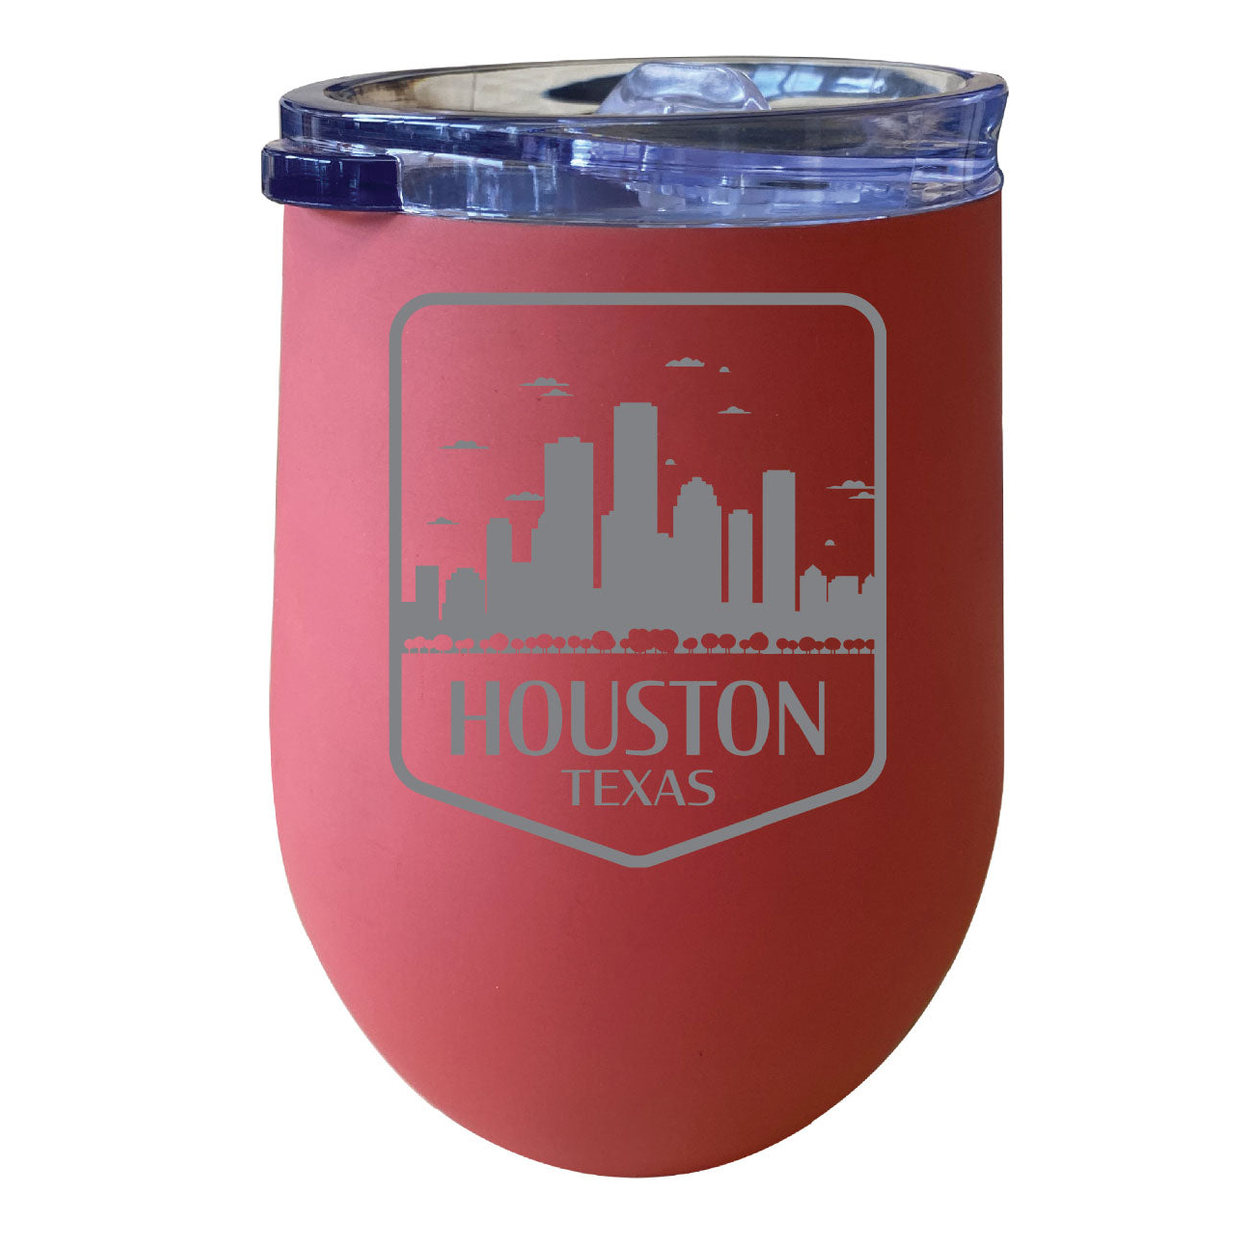 Houston Texas Souvenir 12 Oz Engraved Insulated Wine Stainless Steel Tumbler - Coral,,4-Pack